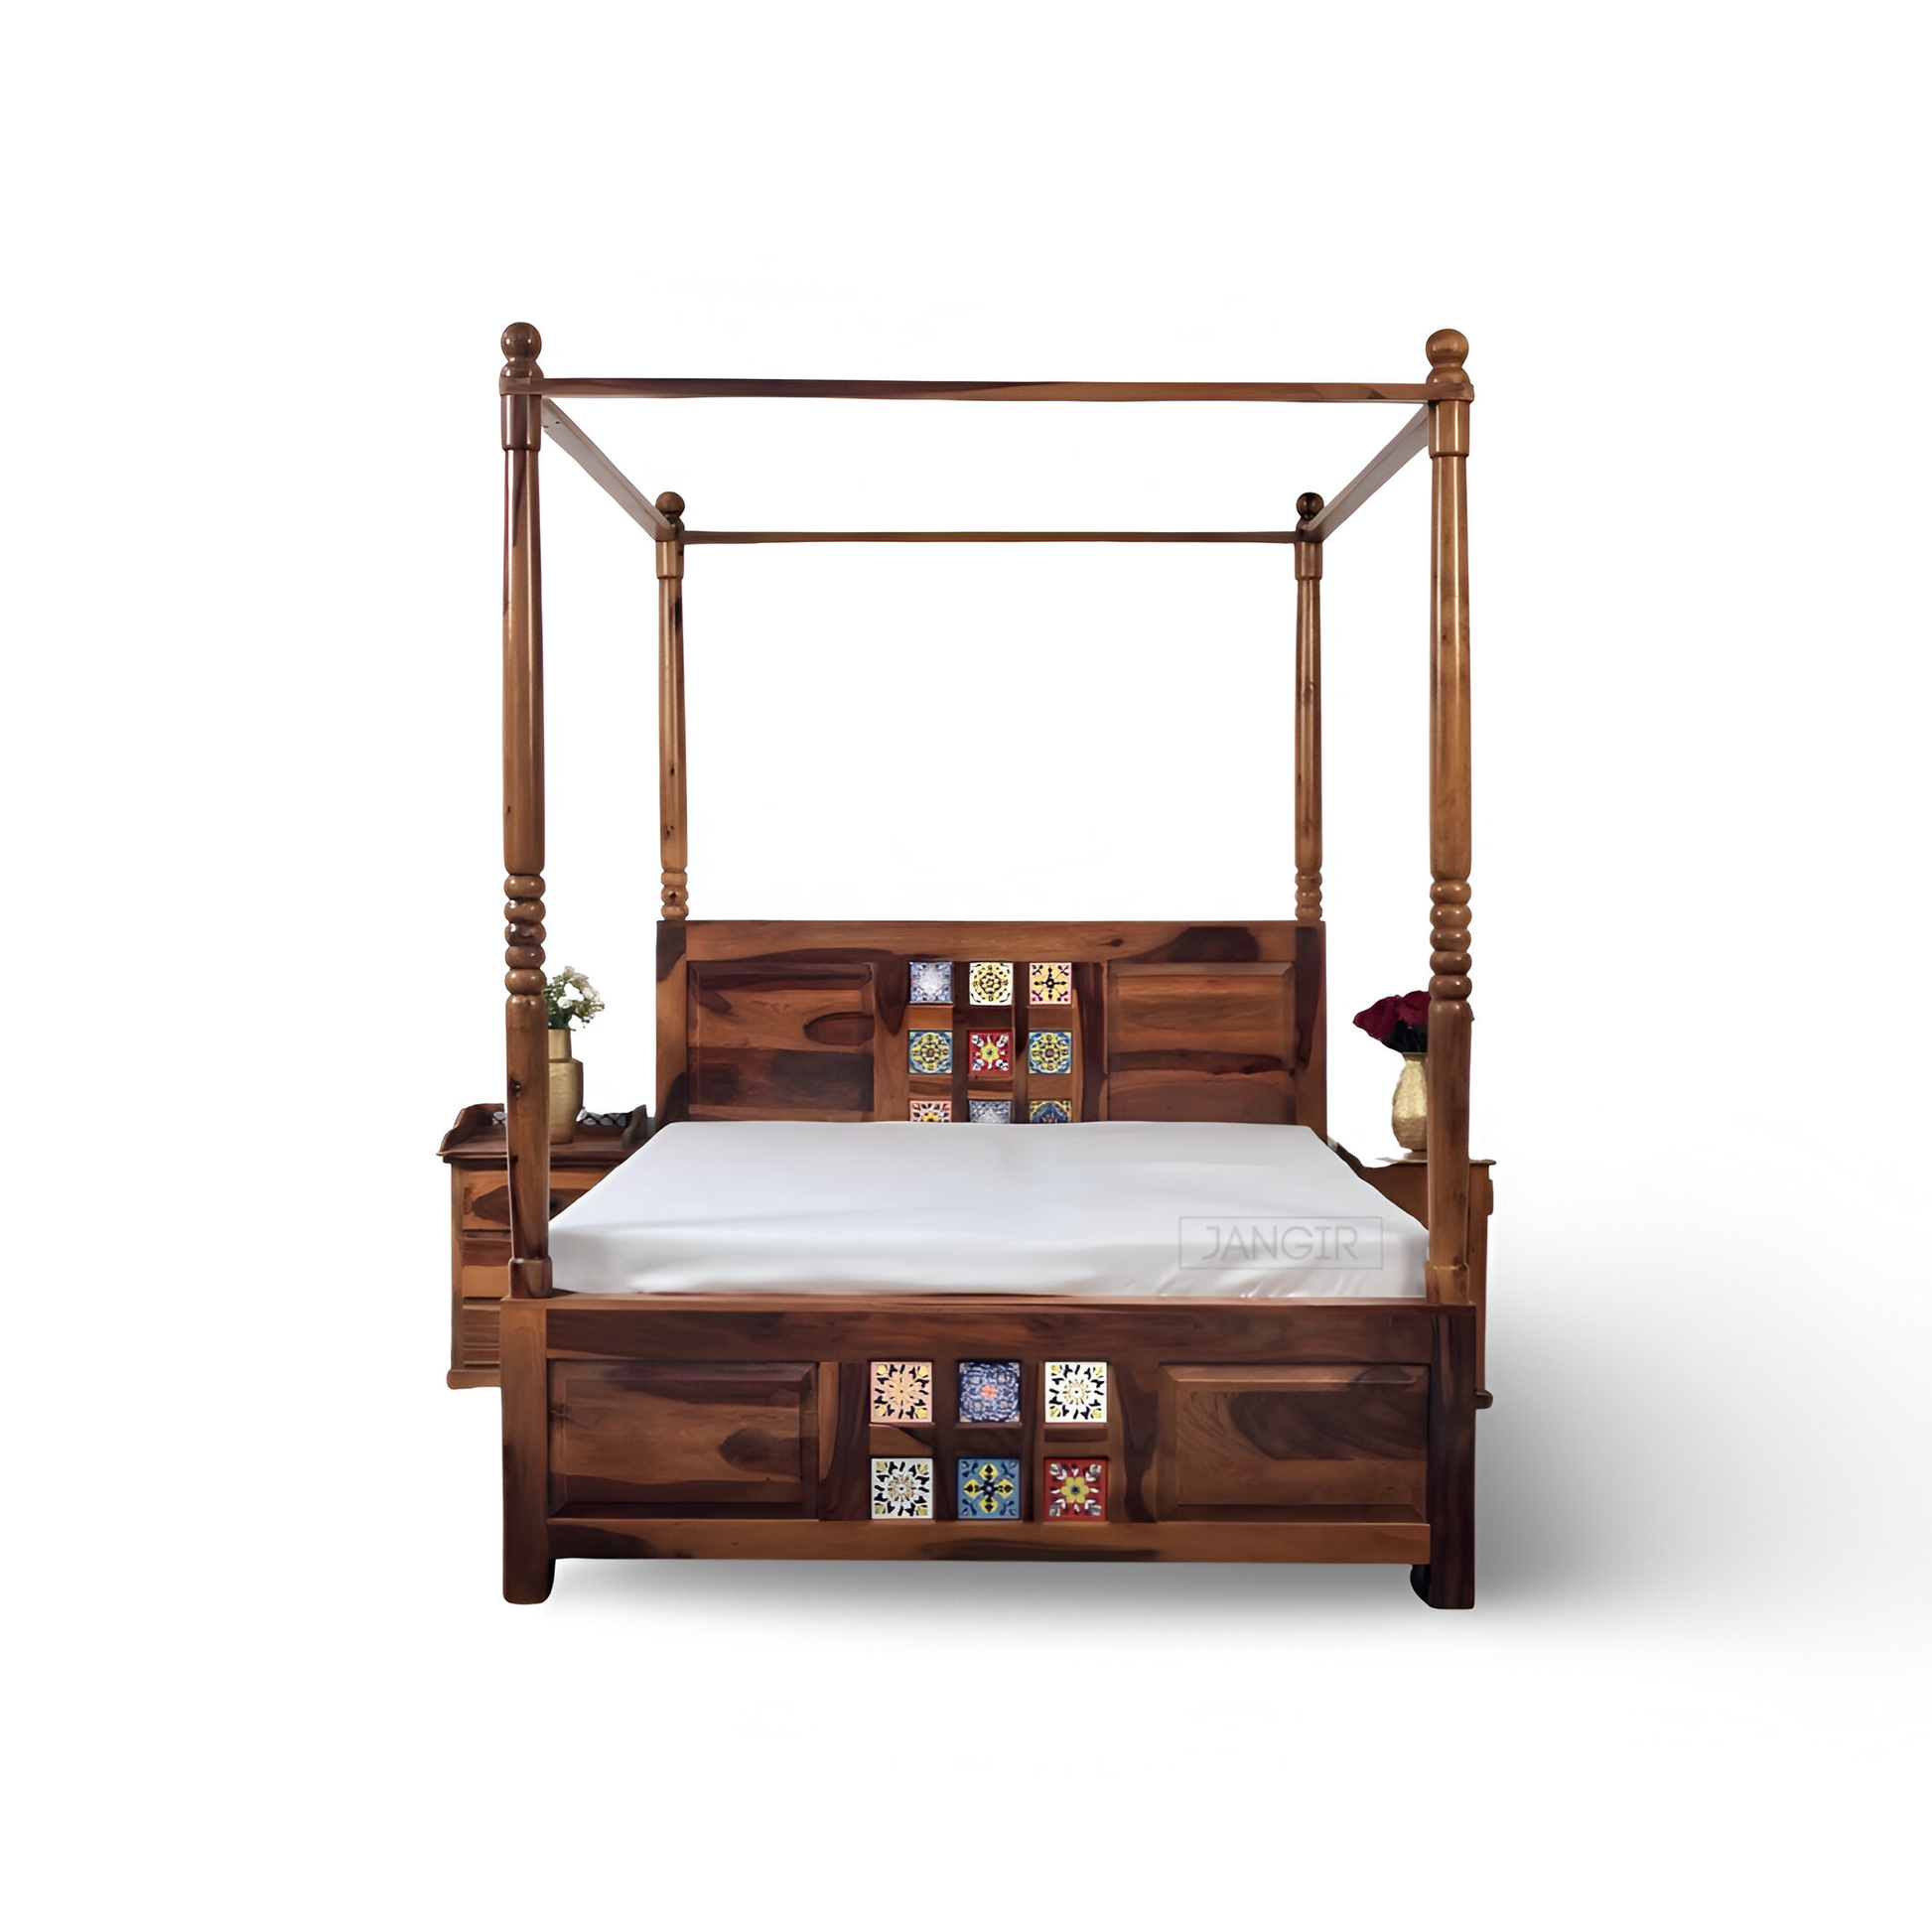 Transform your bedroom with our exquisite traditional style tiles poster bed with storage, made from sheesham wood. Explore our range of king size and queen size beds near you in Bangalore today!